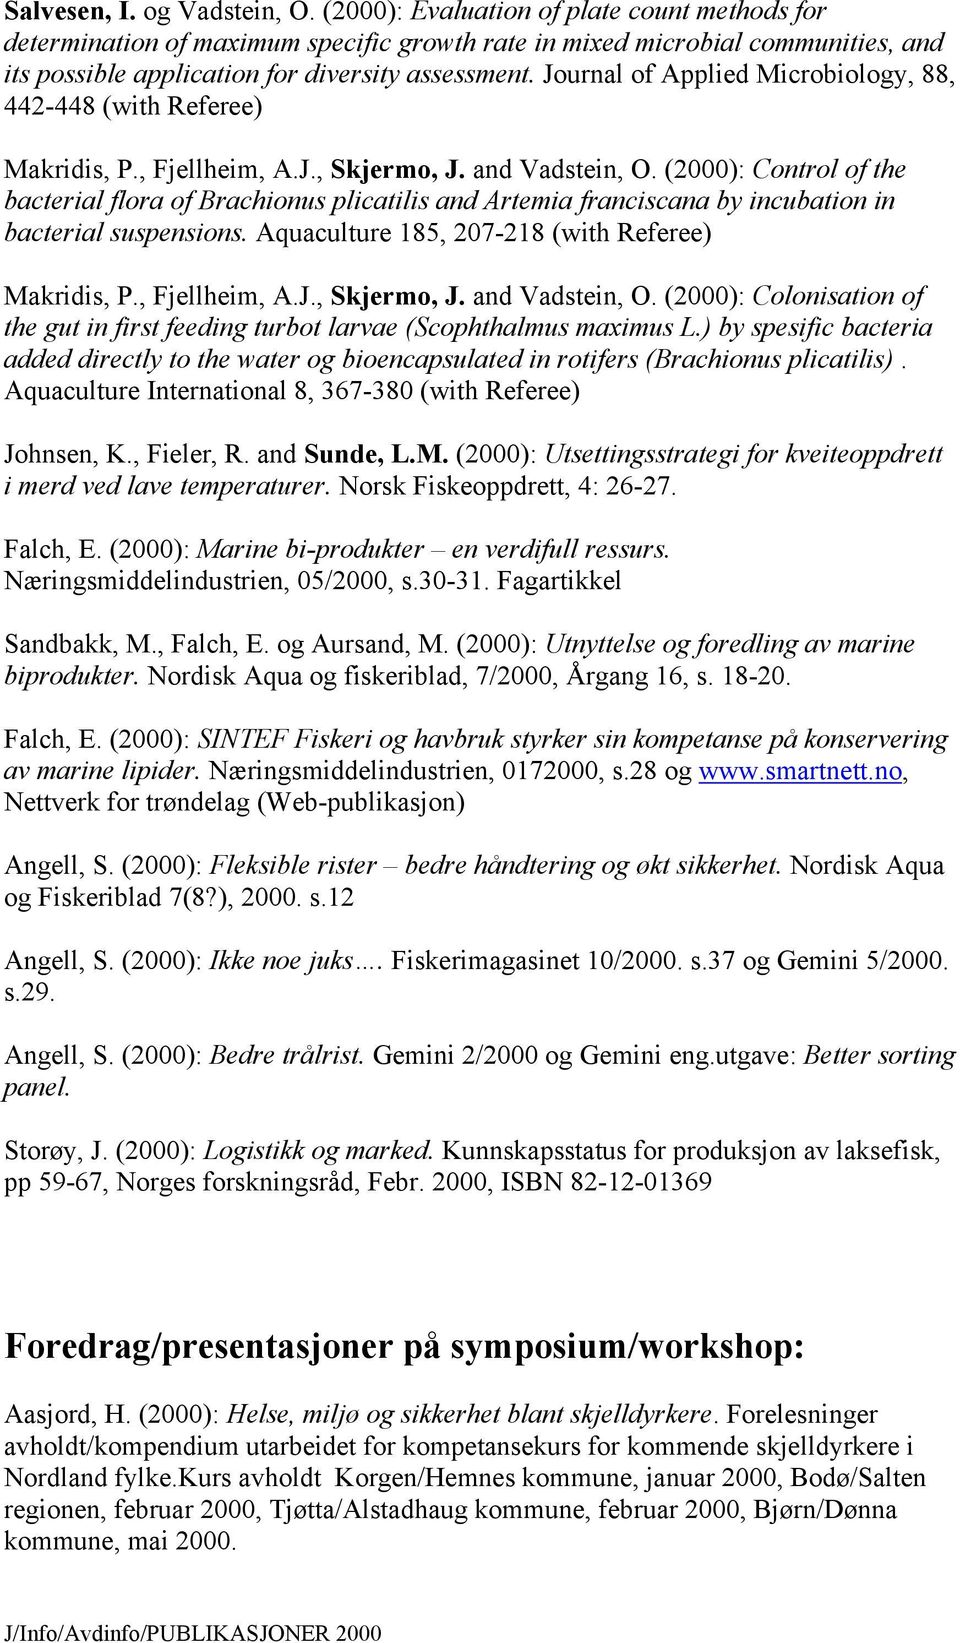 Journal of Applied Microbiology, 88, 442-448 (with Referee) Makridis, P., Fjellheim, A.J., Skjermo, J. and Vadstein, O.